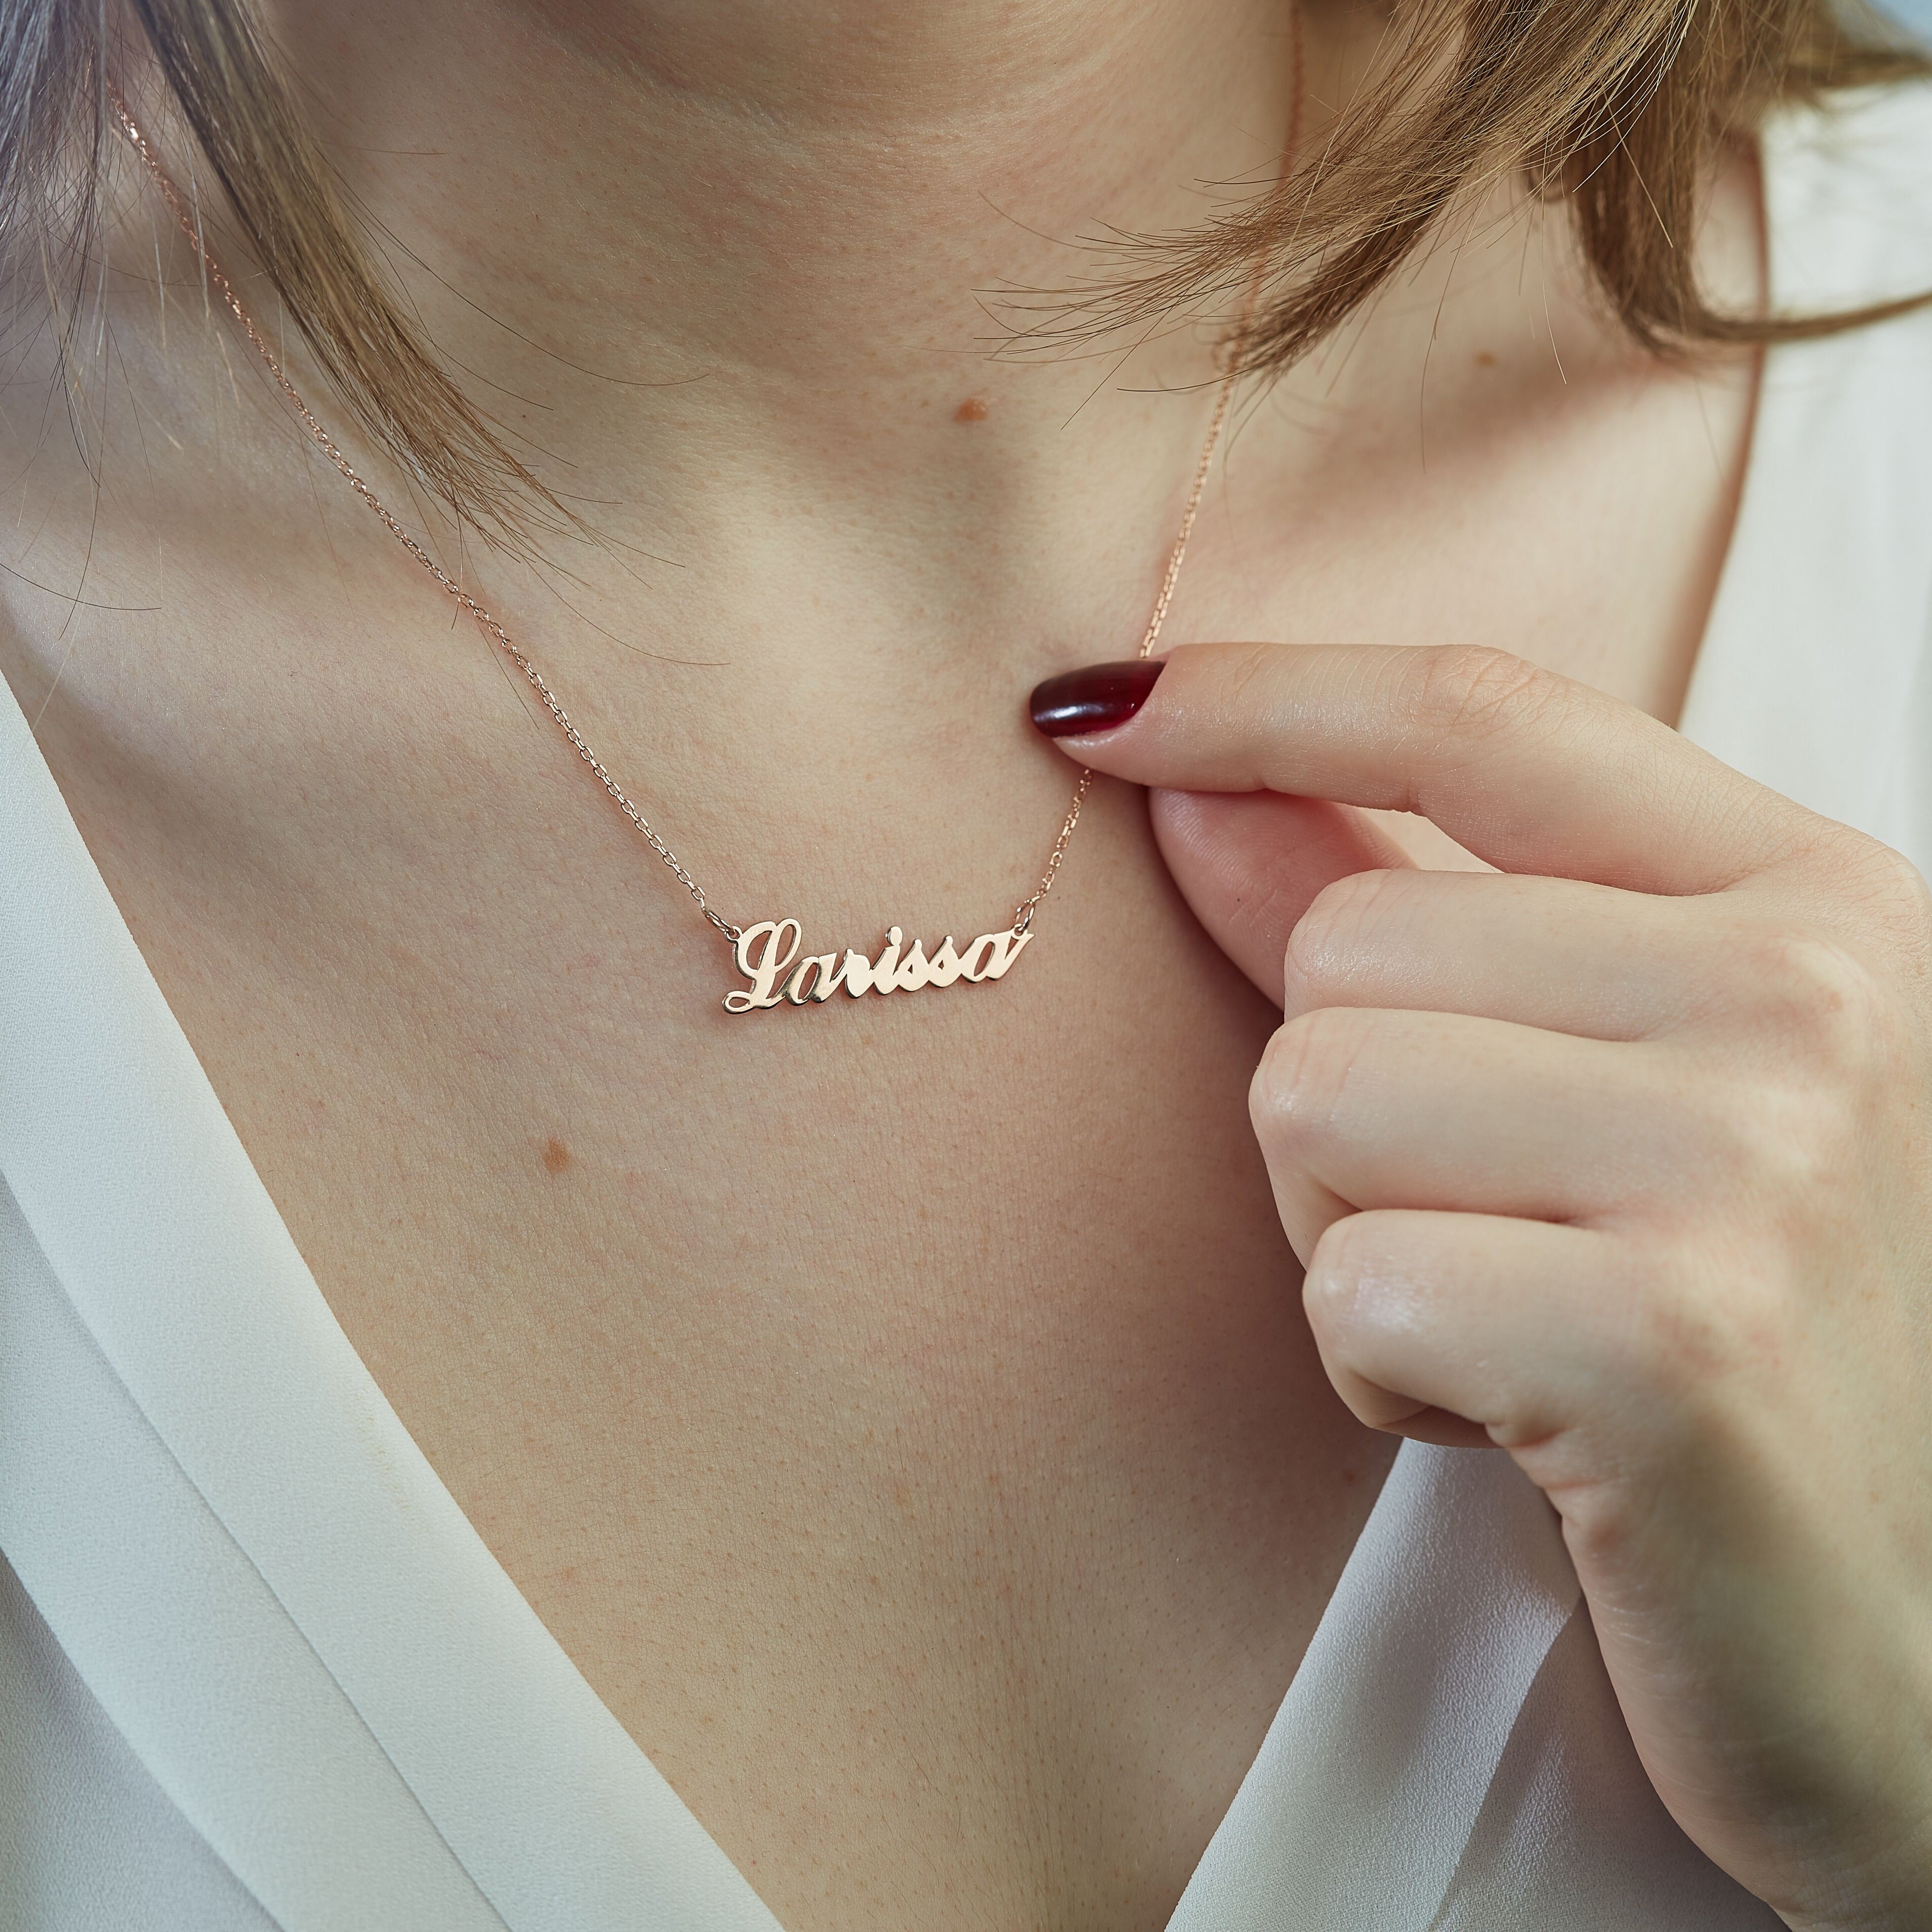 Woman wearing a 'Larissa' custom rose gold name necklace in cursive script, highlighting its elegant design and fine chain.